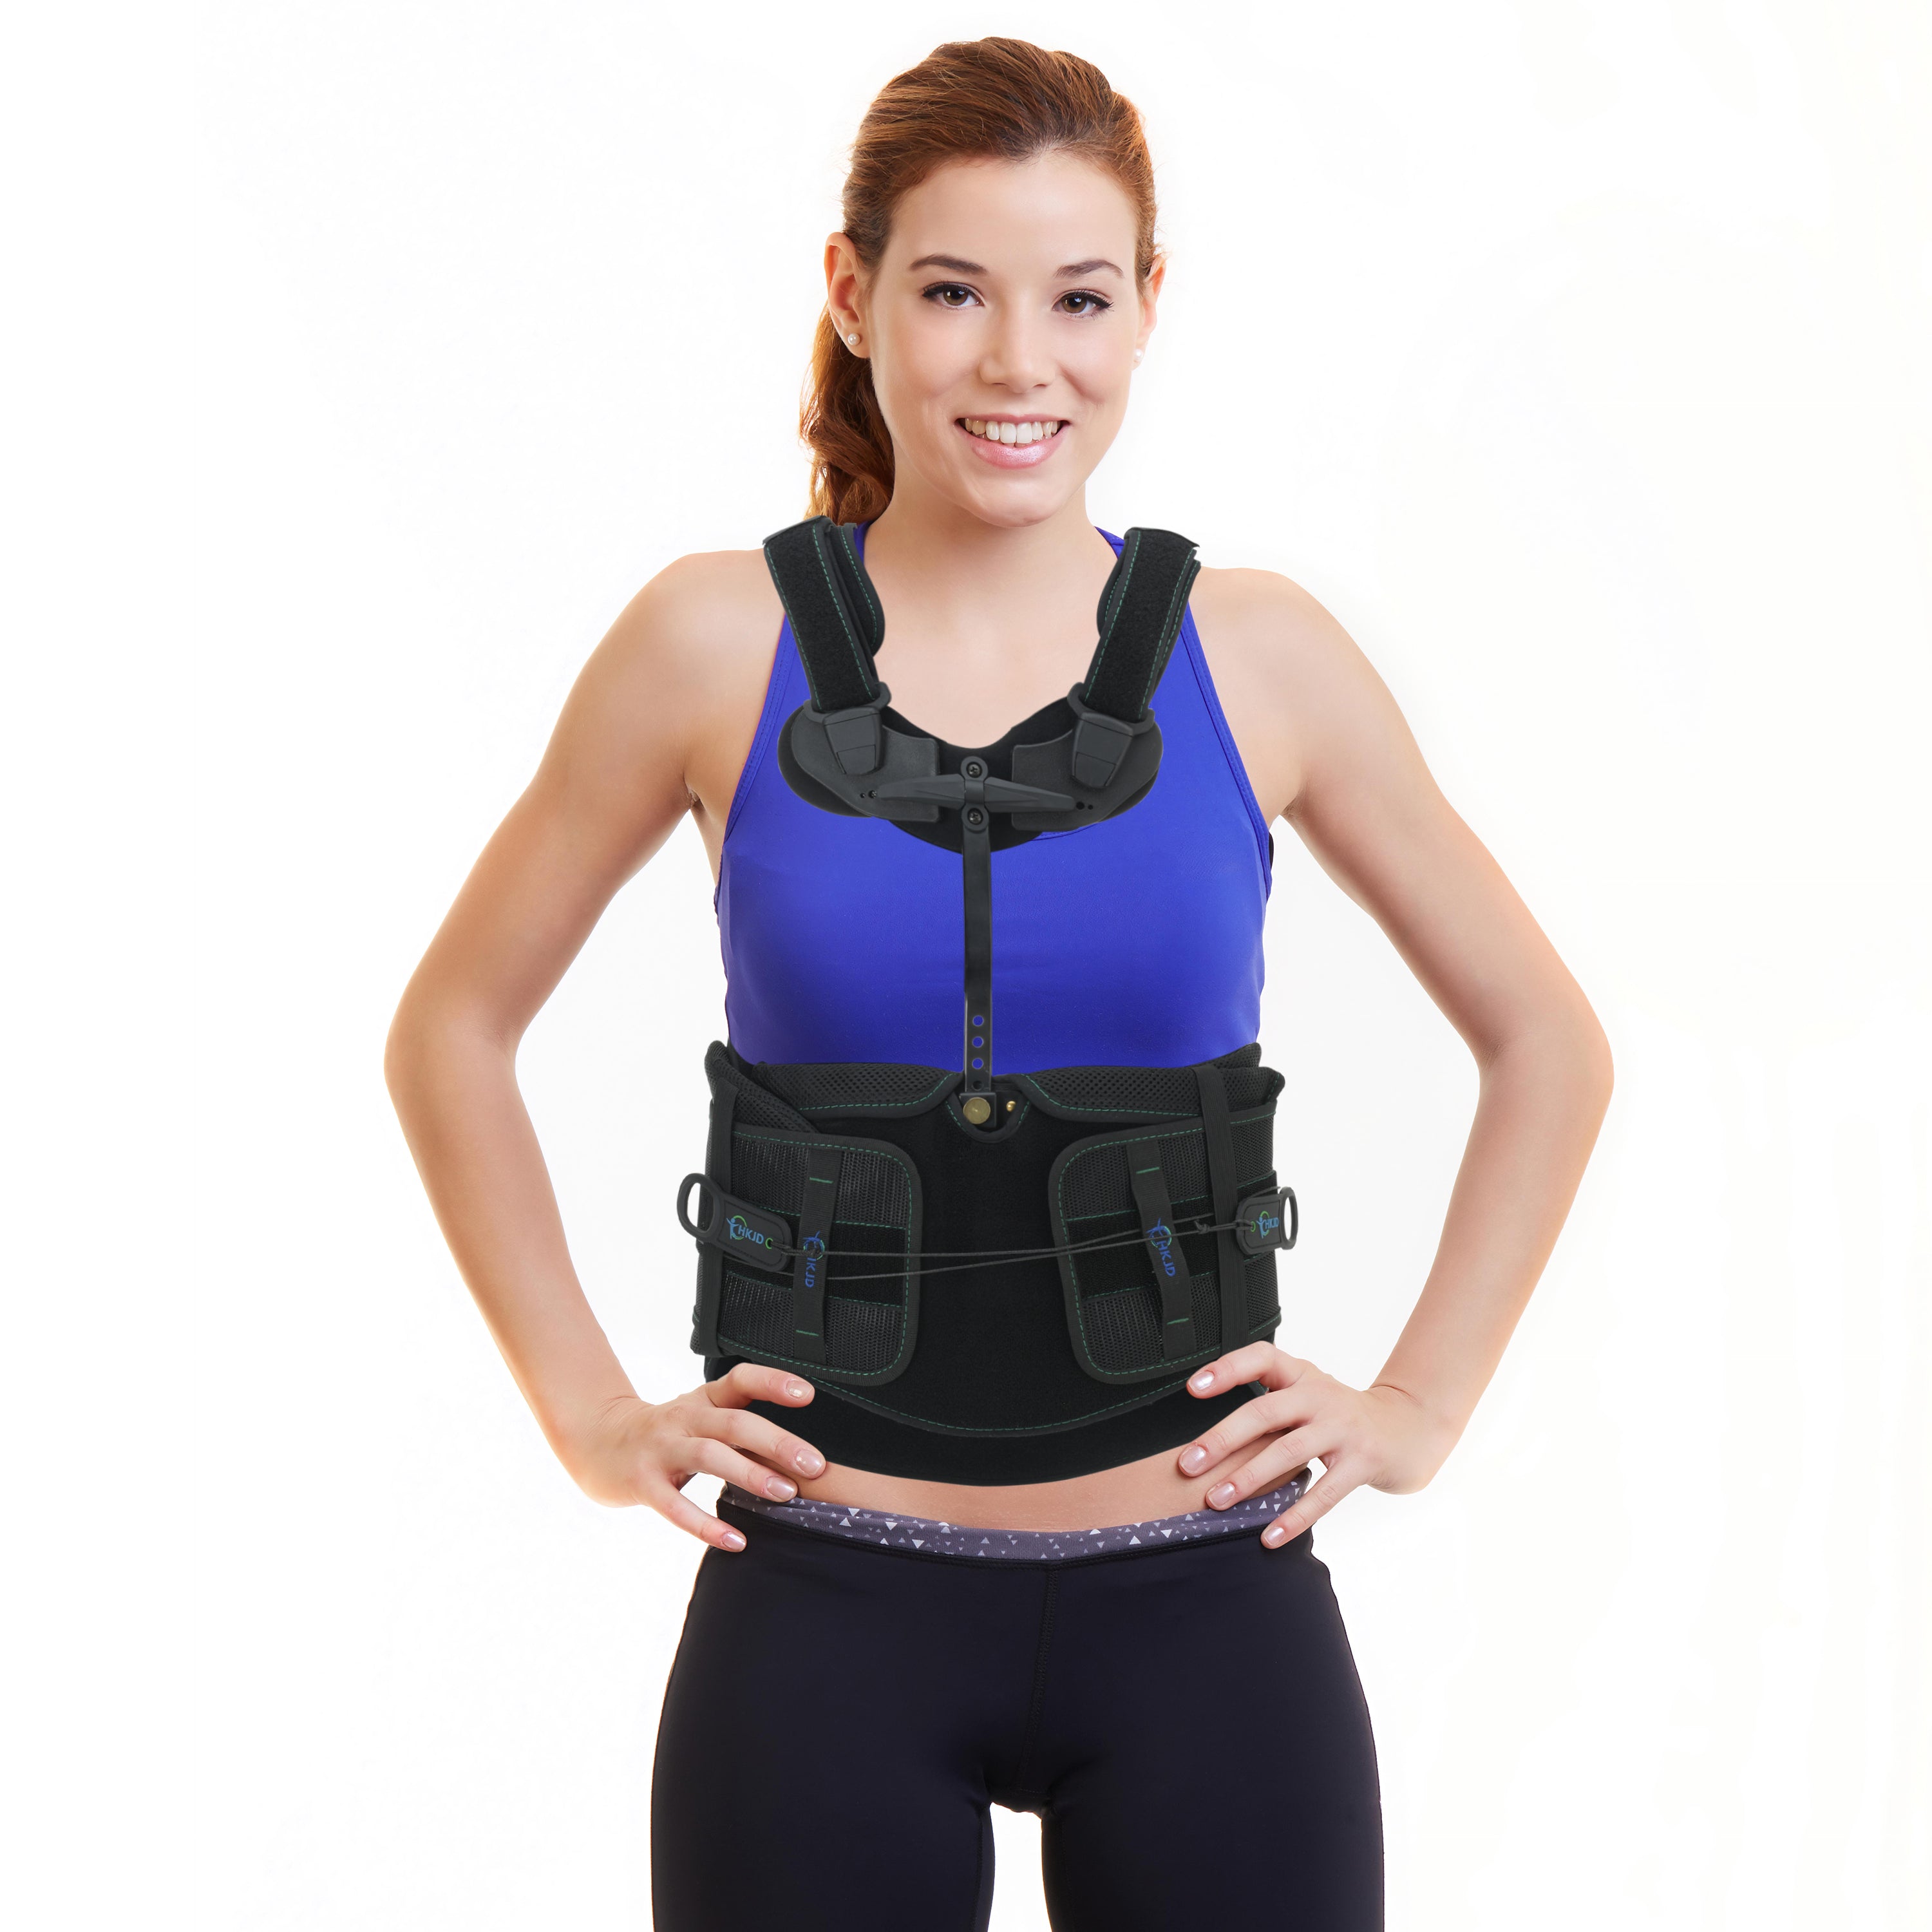 Brace Direct Soft TLSO Back Brace - Discreet Full Back Support and